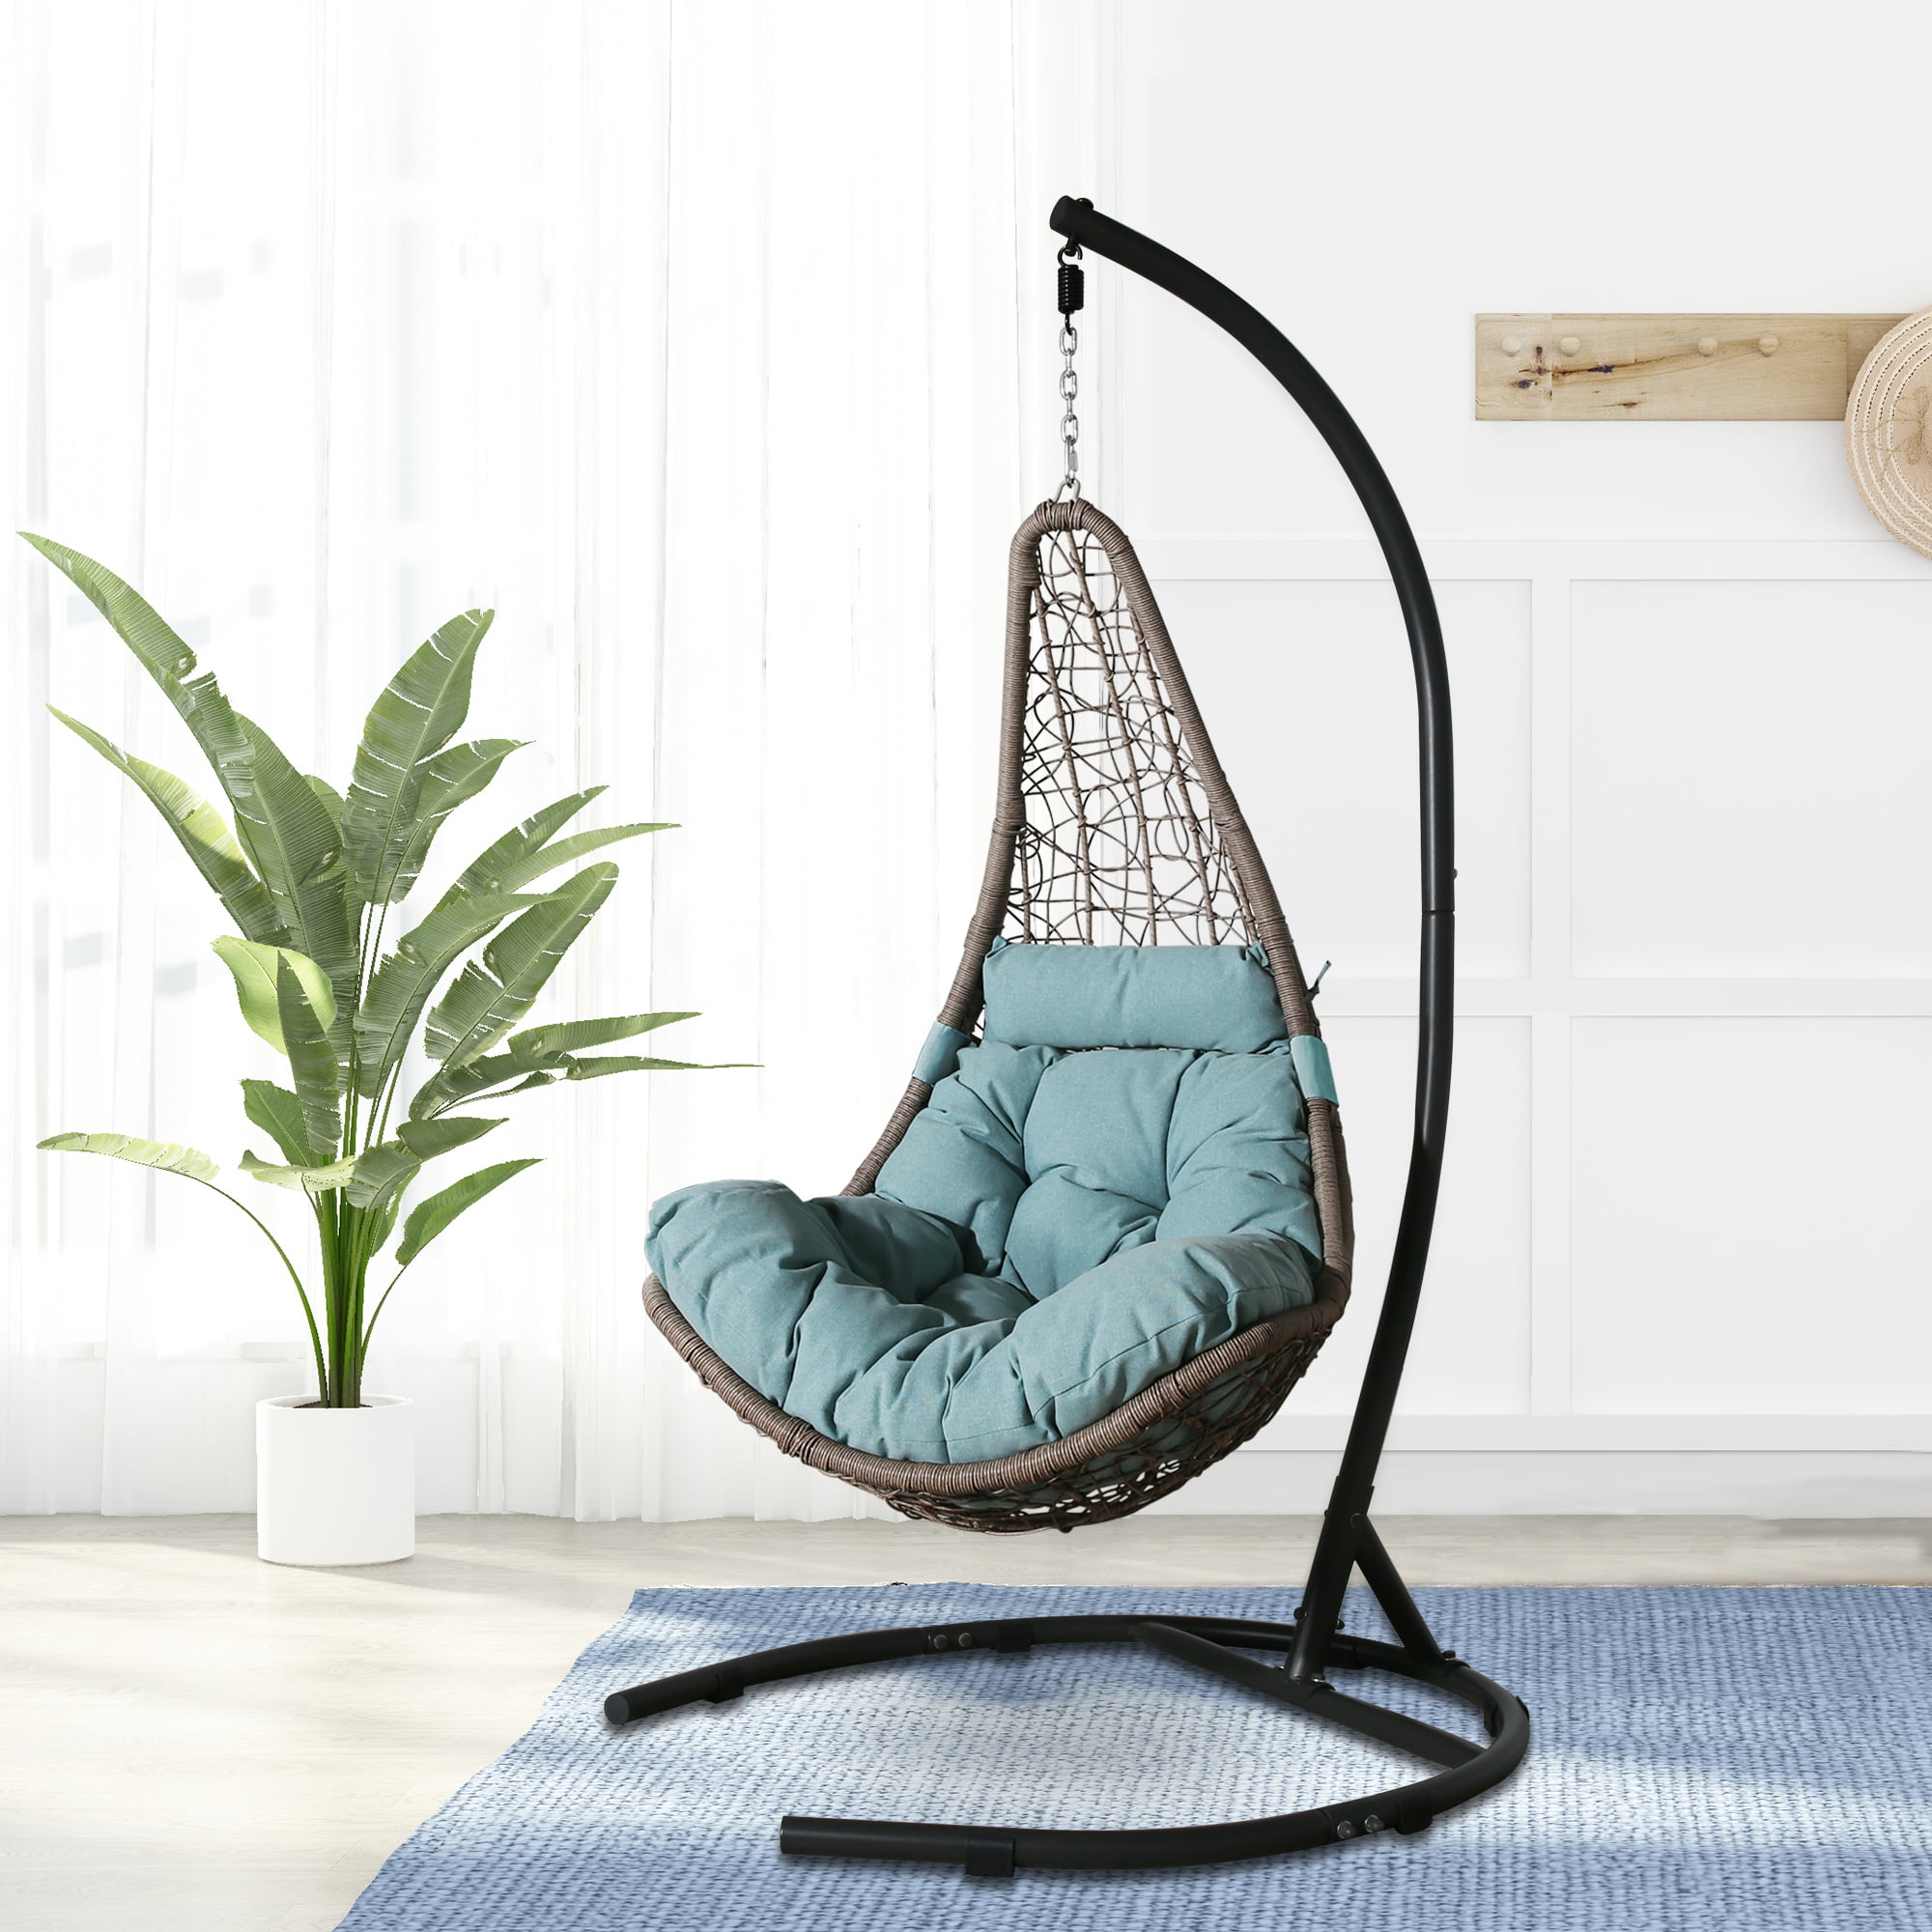 Ulax Furniture Indoor/Outdoor Wicker Hanging Basket Swing Chair, Hammock  Moon Chair with Stand(Blue)